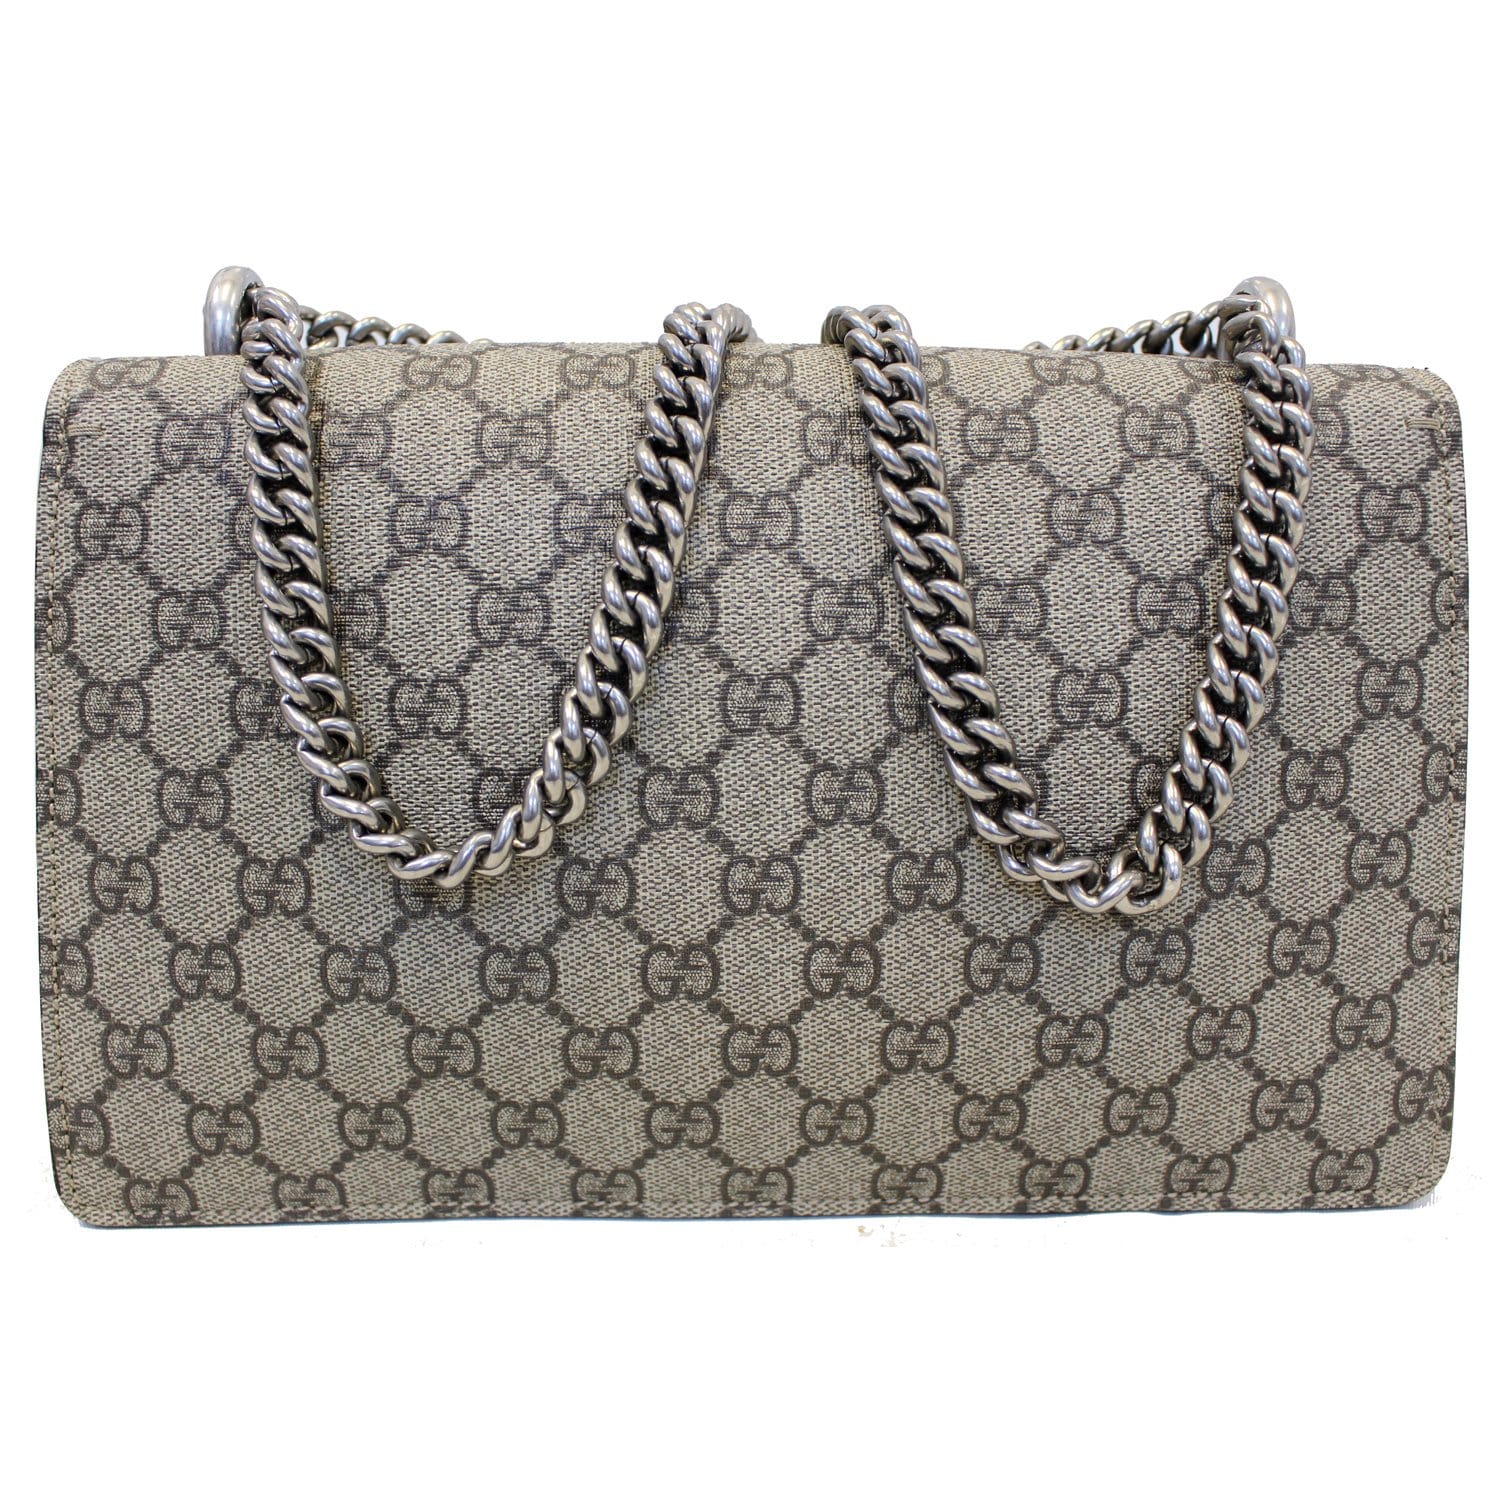 Gucci Dionysus Small Shoulder Bag in White